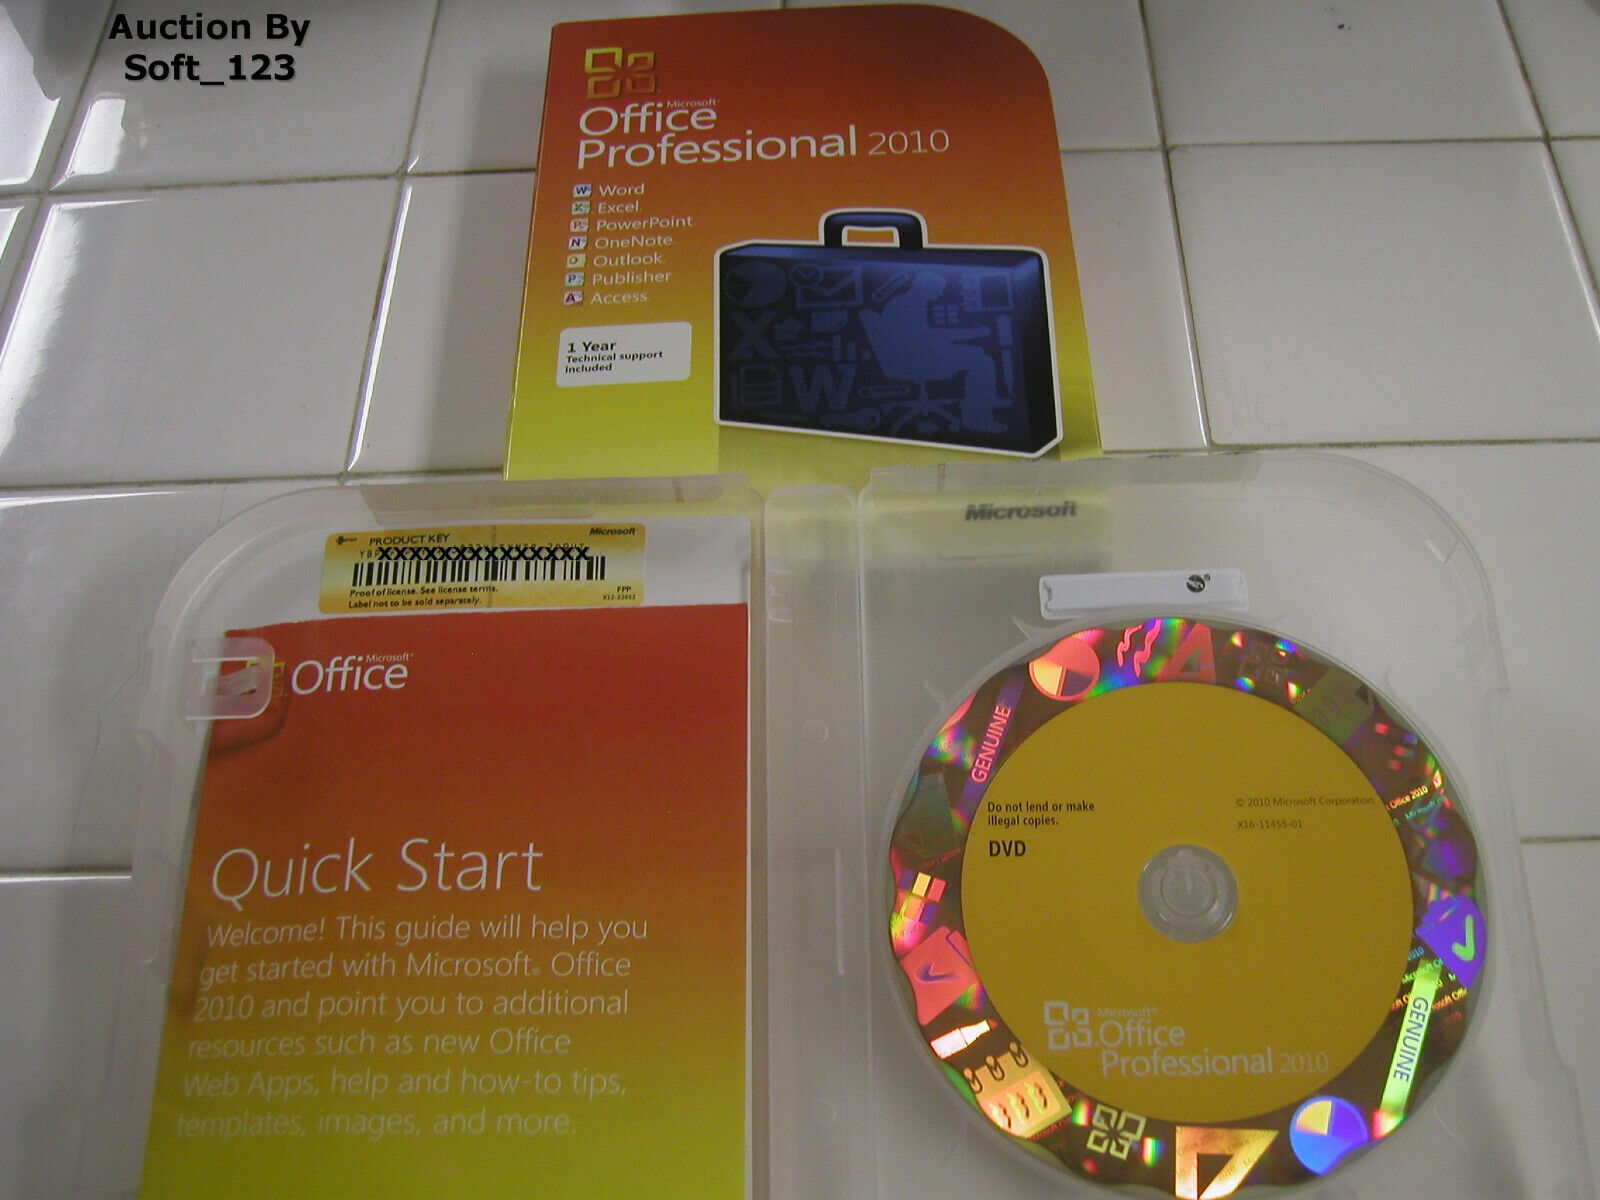 Microsoft Office 2010 Professional For 2 PCs Full English Ver. =NEW RETAIL BOX=